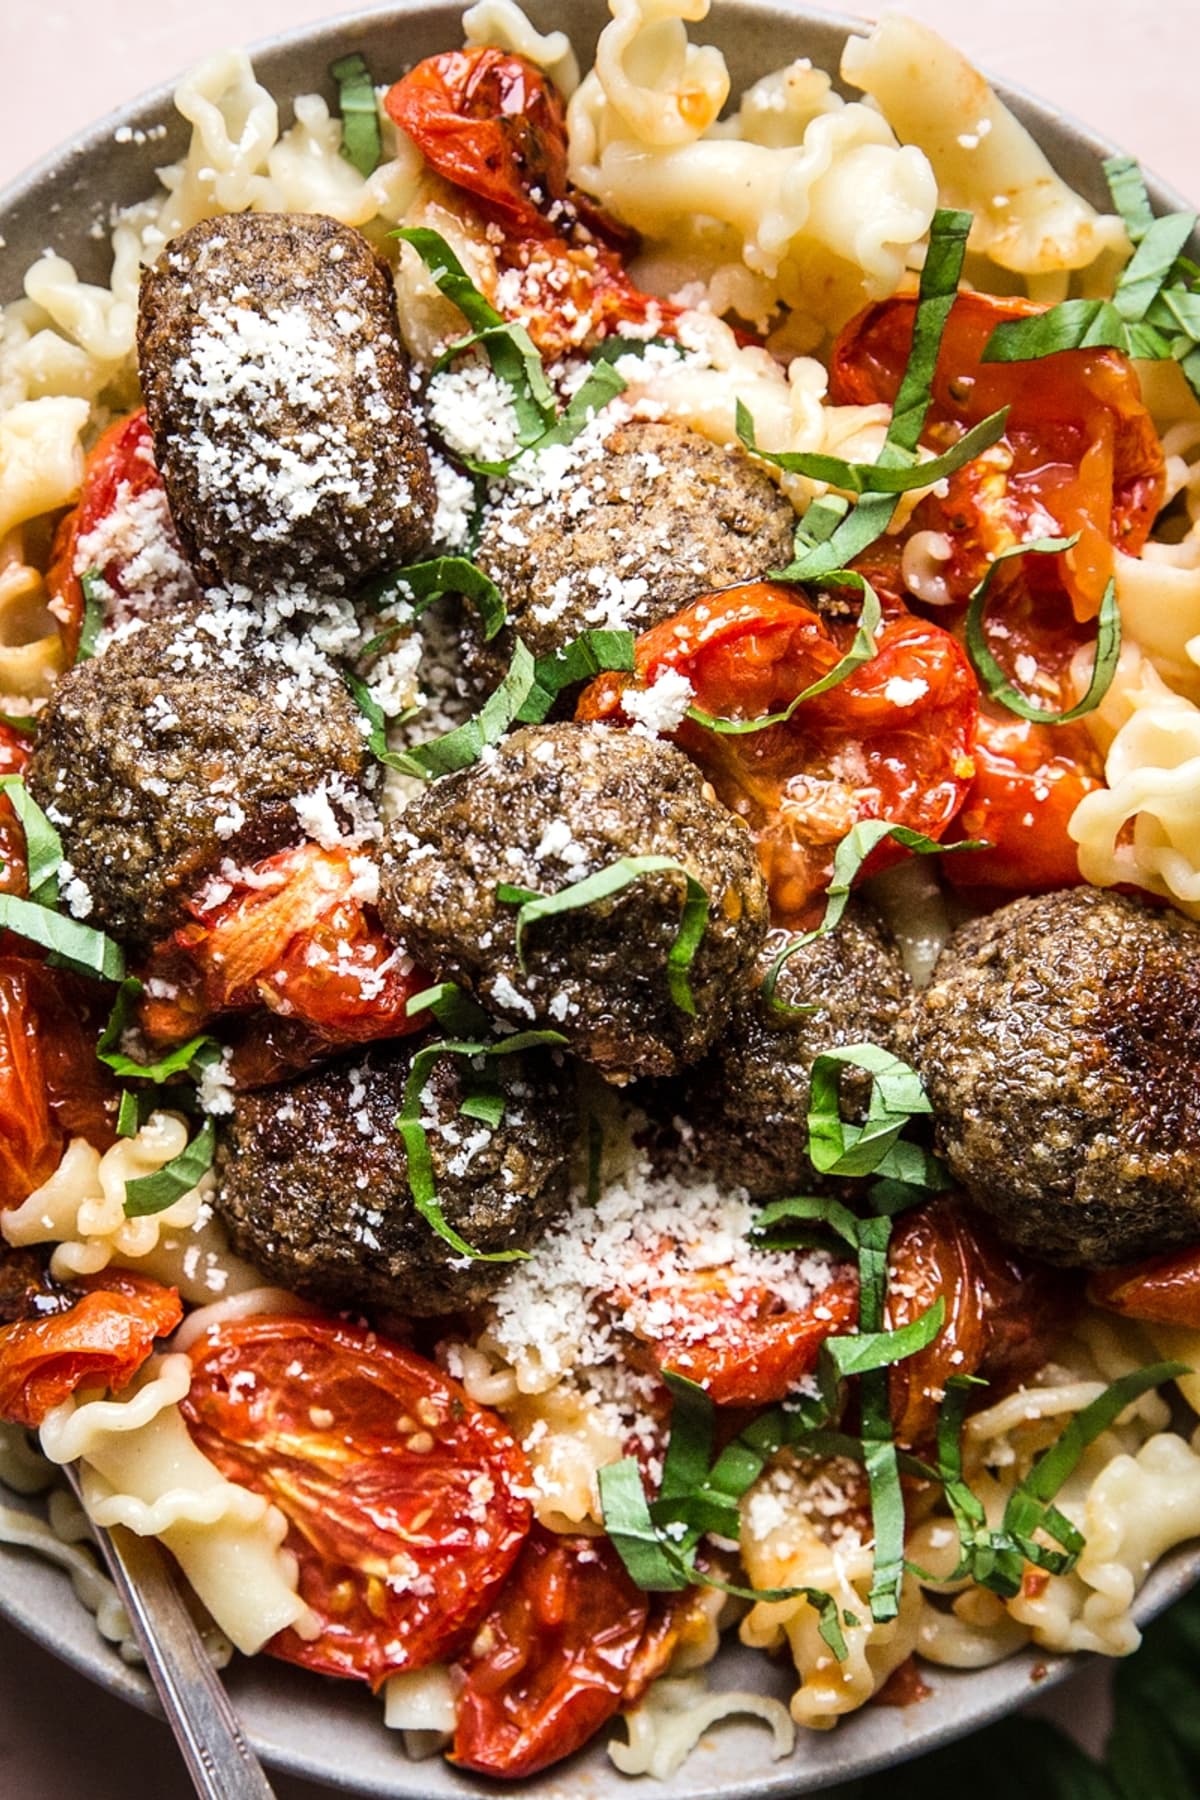 vegetarian meatballs in a bowl of pasta with roasted tomatoes.